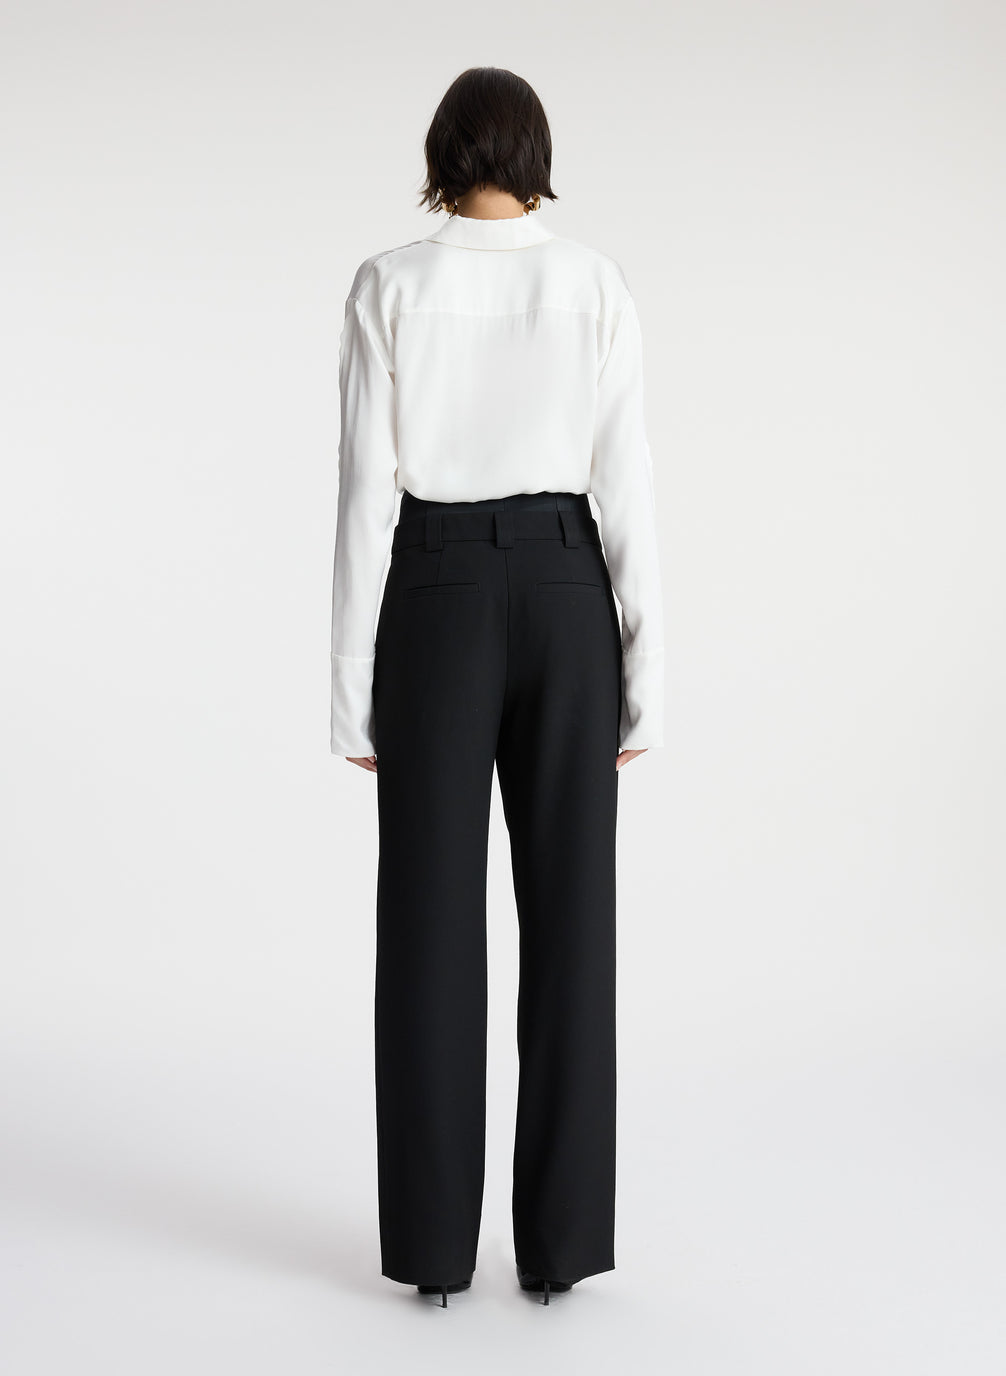 back view of woman wearing white scalloped detailed long sleeve top and black pants